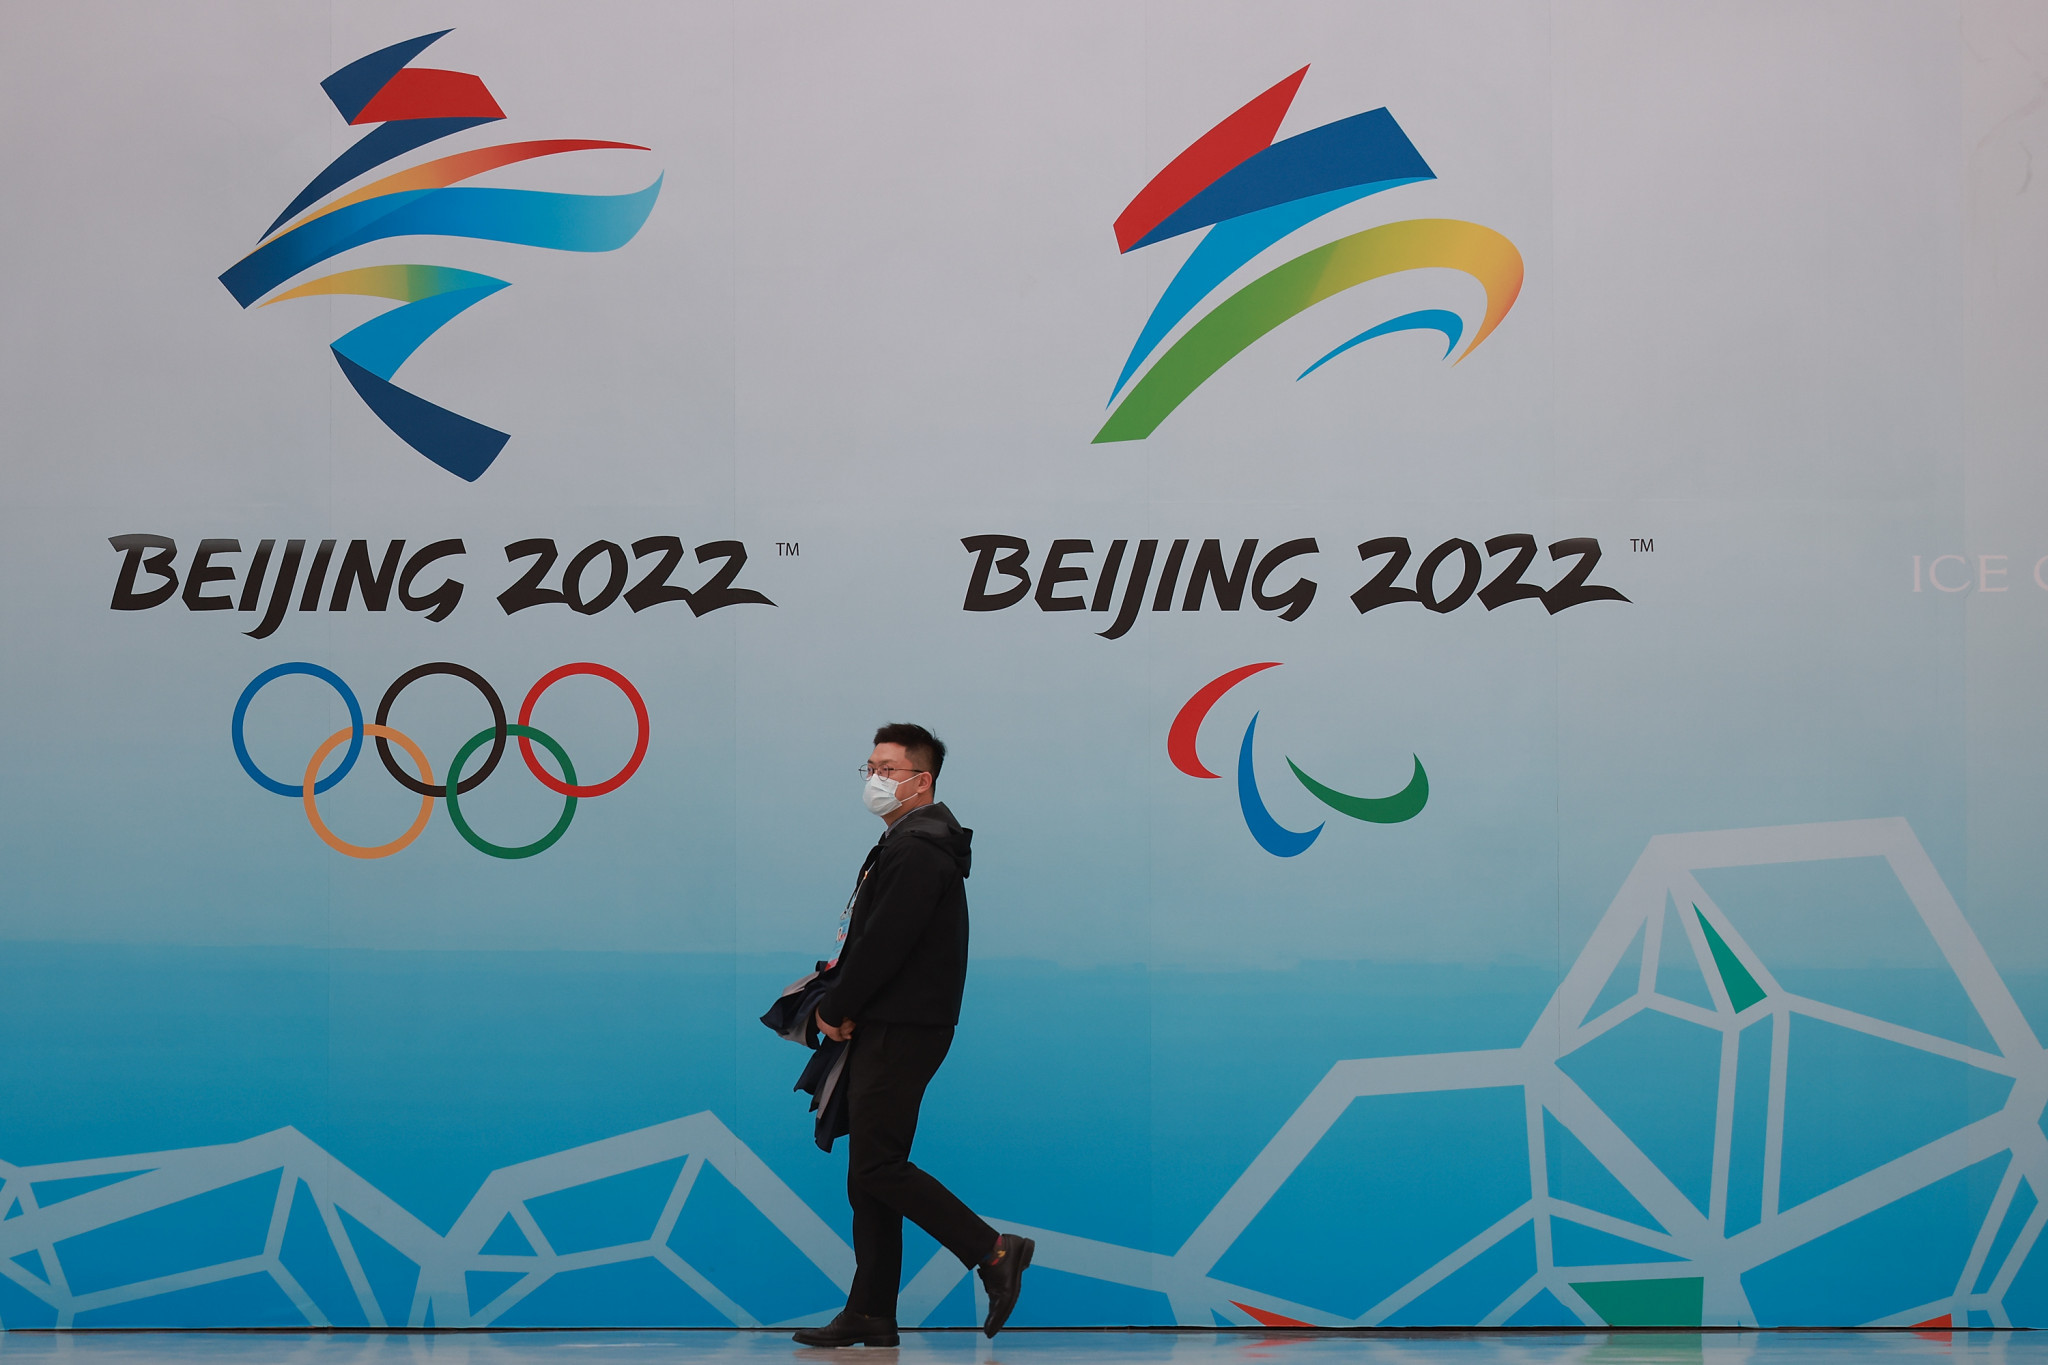 China claimed to have tightened travel restrictions in Tibet prior to Winter Olympics